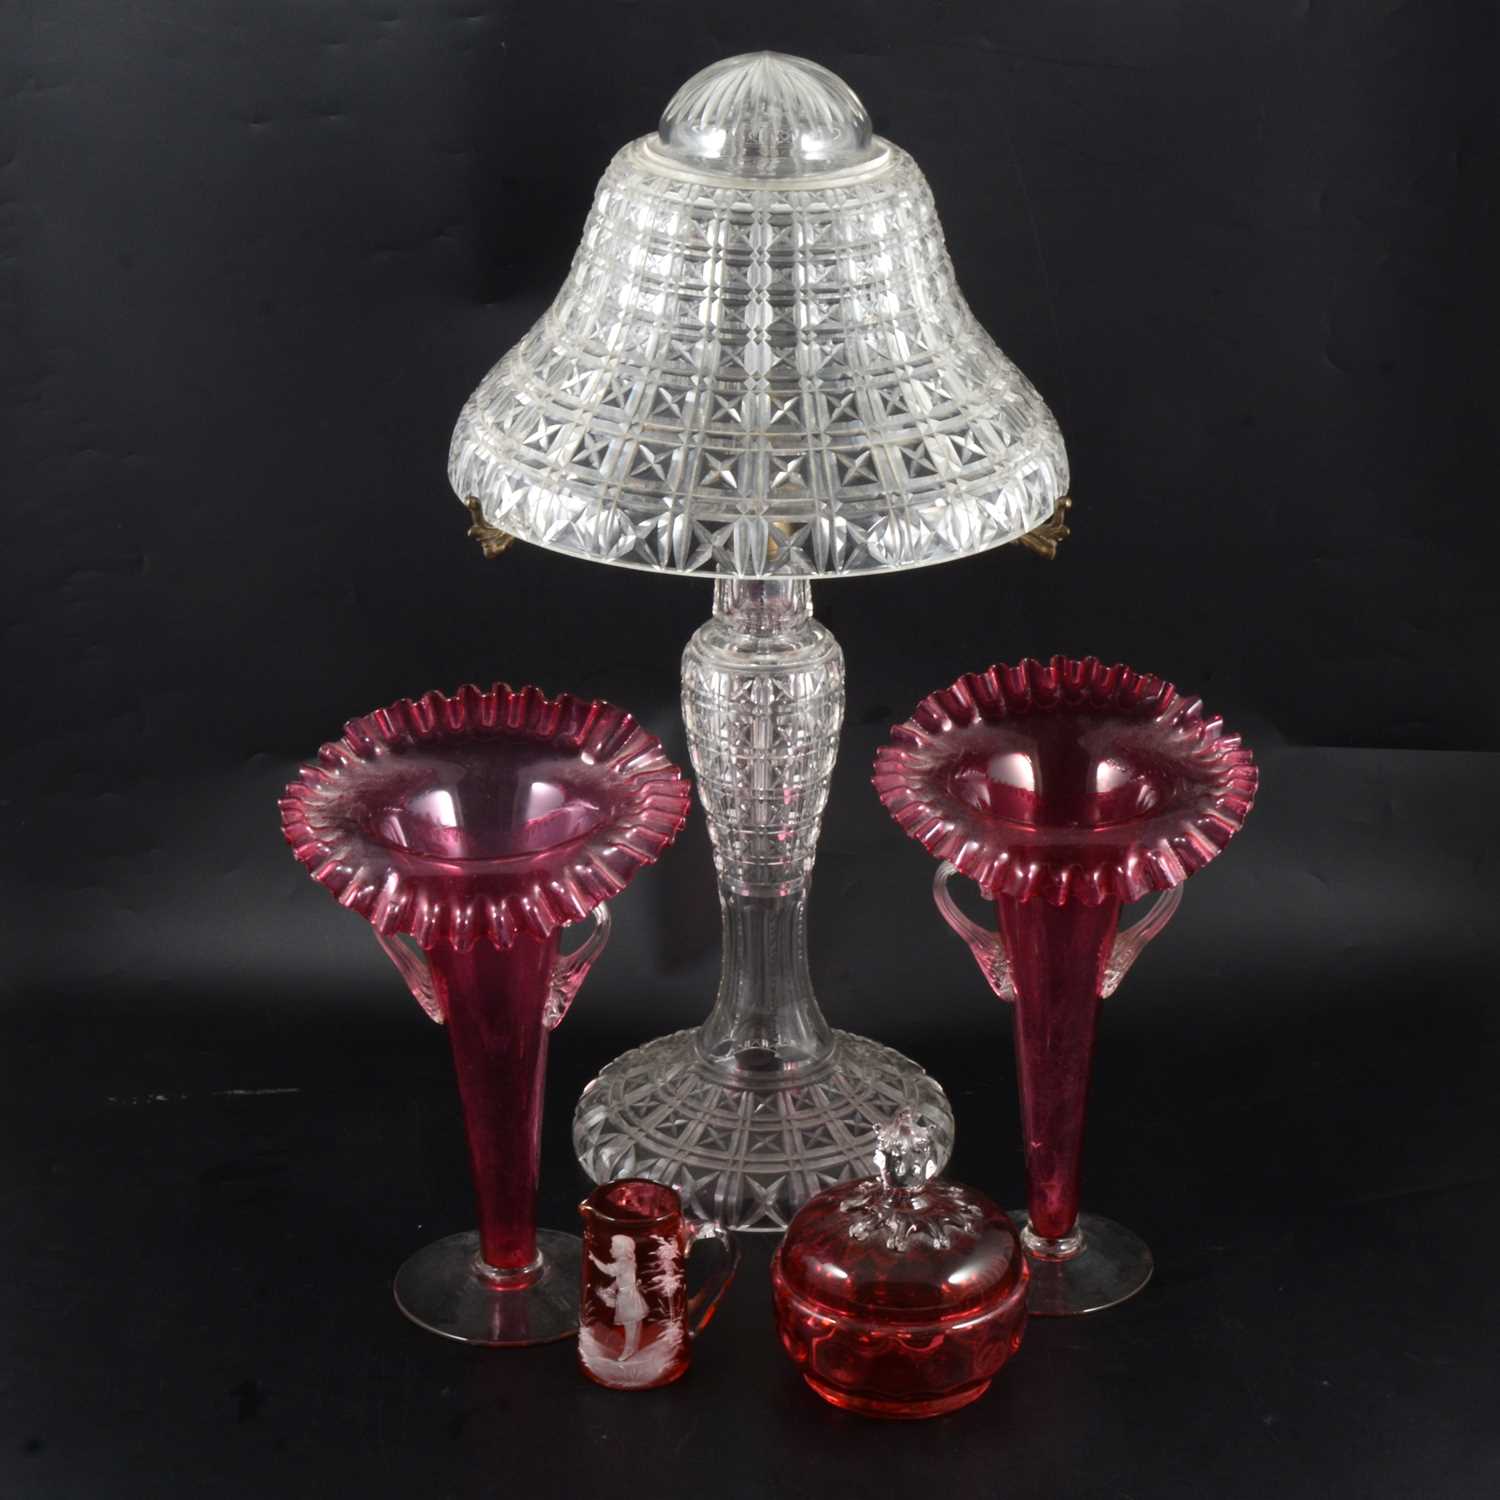 Lot 38 - Glass table lamp and ornamental glassware